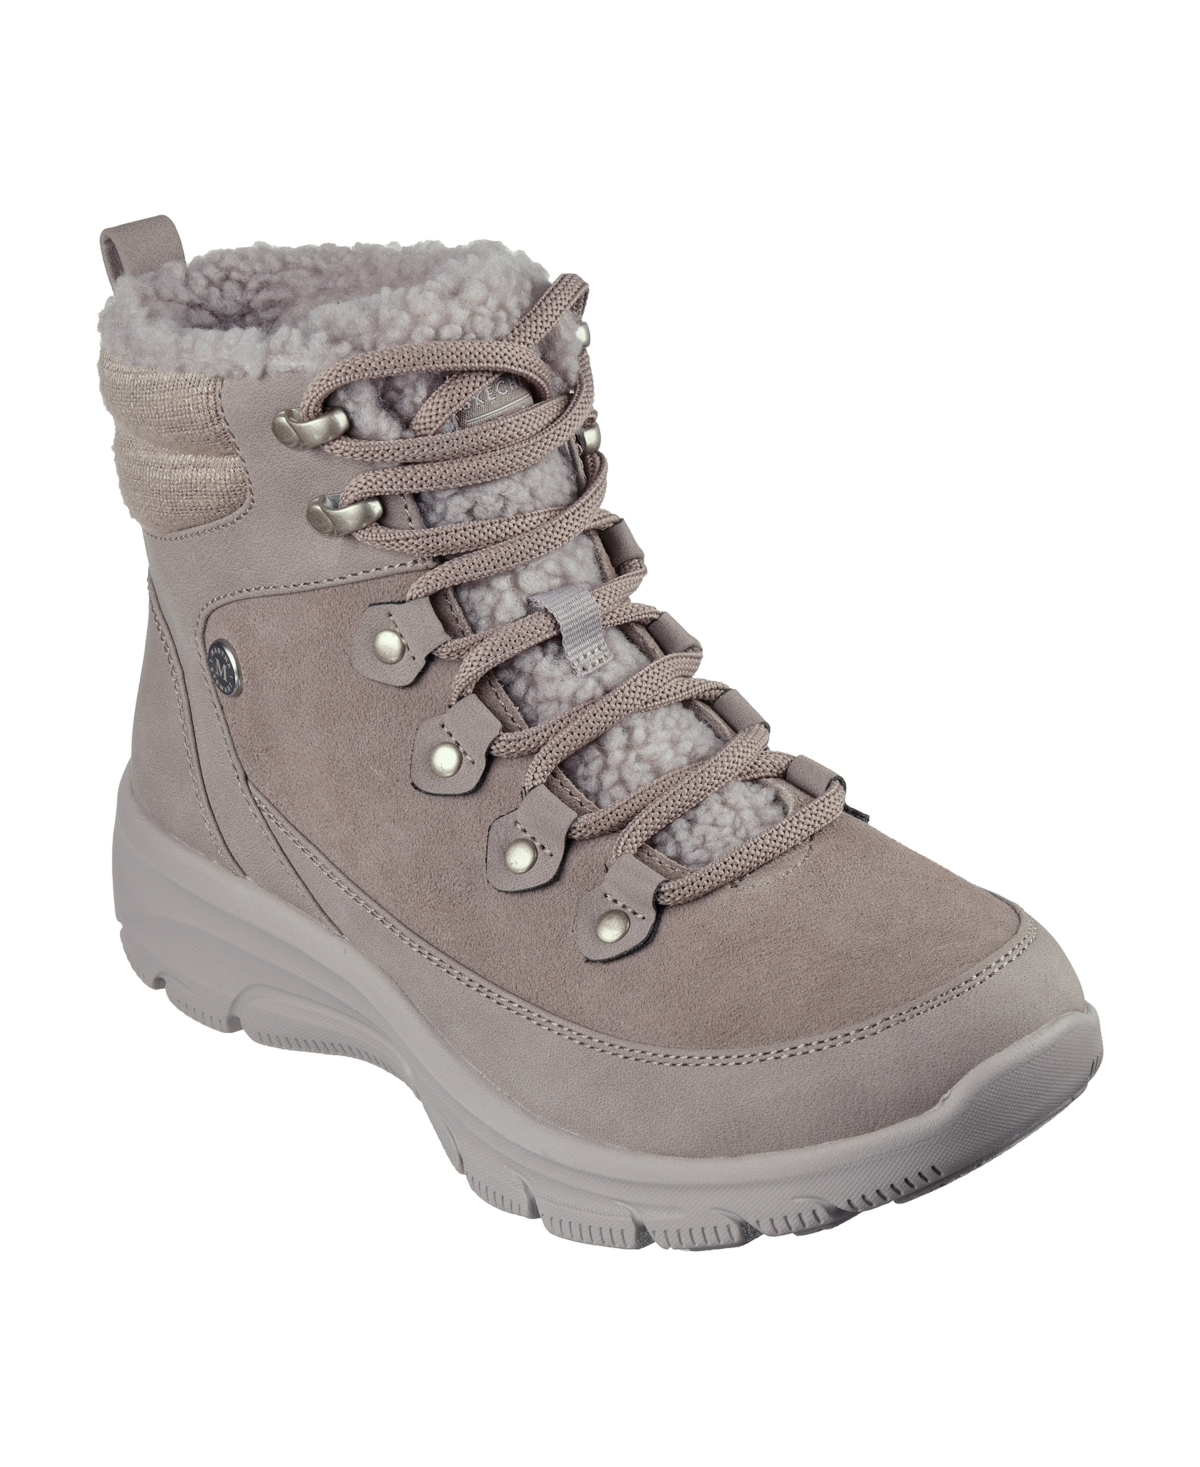 Women's Martha Stewart Easy Going - Winter Road Boots from Finish Line - Dark Taupe